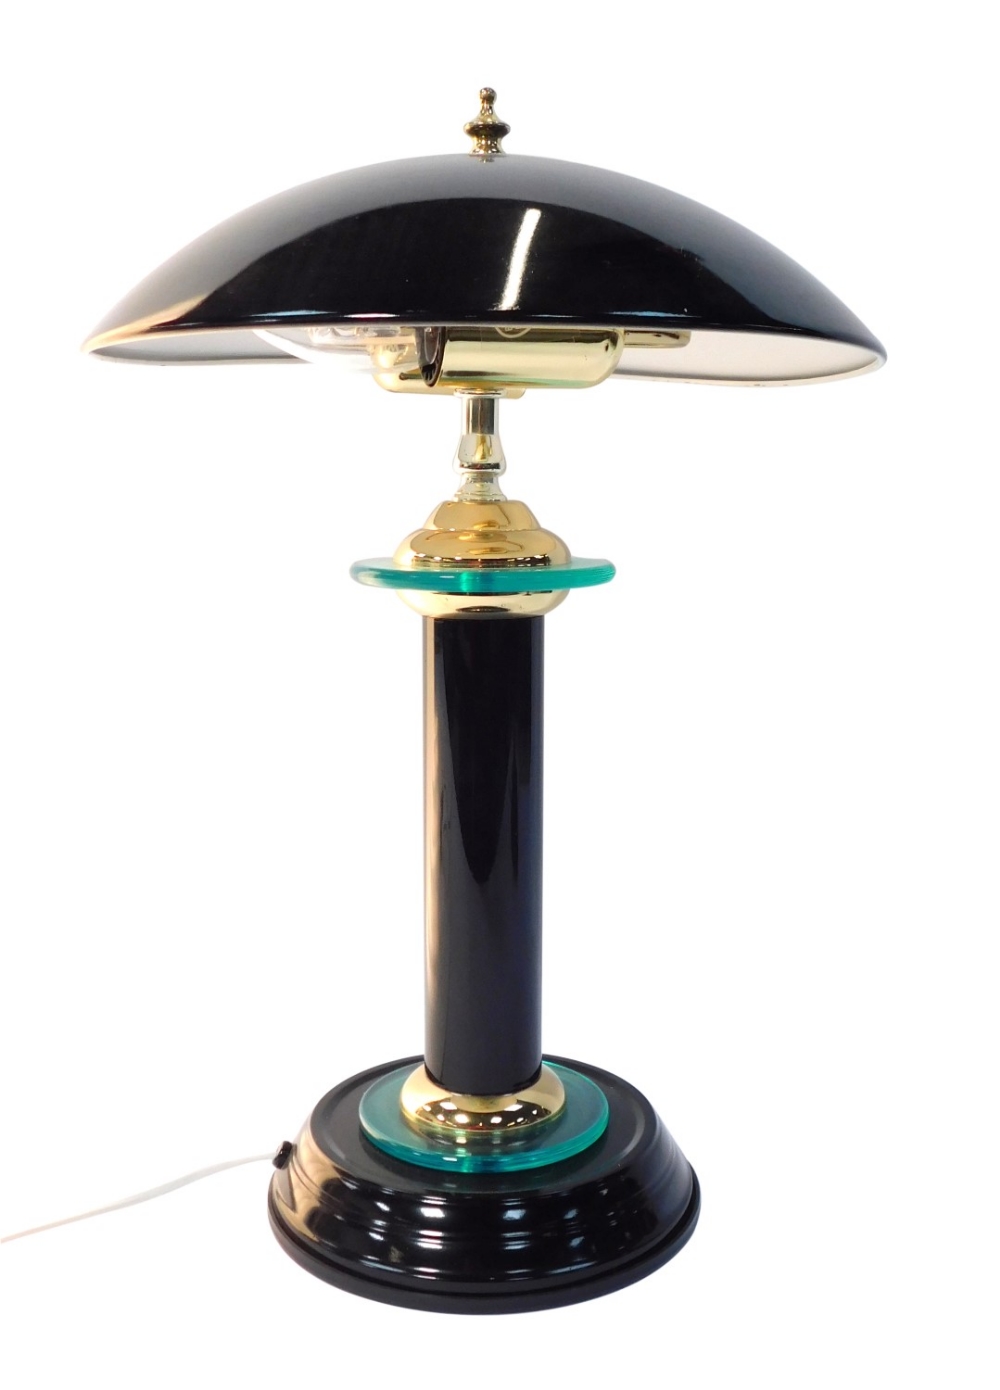 A 1960s/70s style desk lamp, in a black outer casing, with brass and green glass detail, 40cm high.